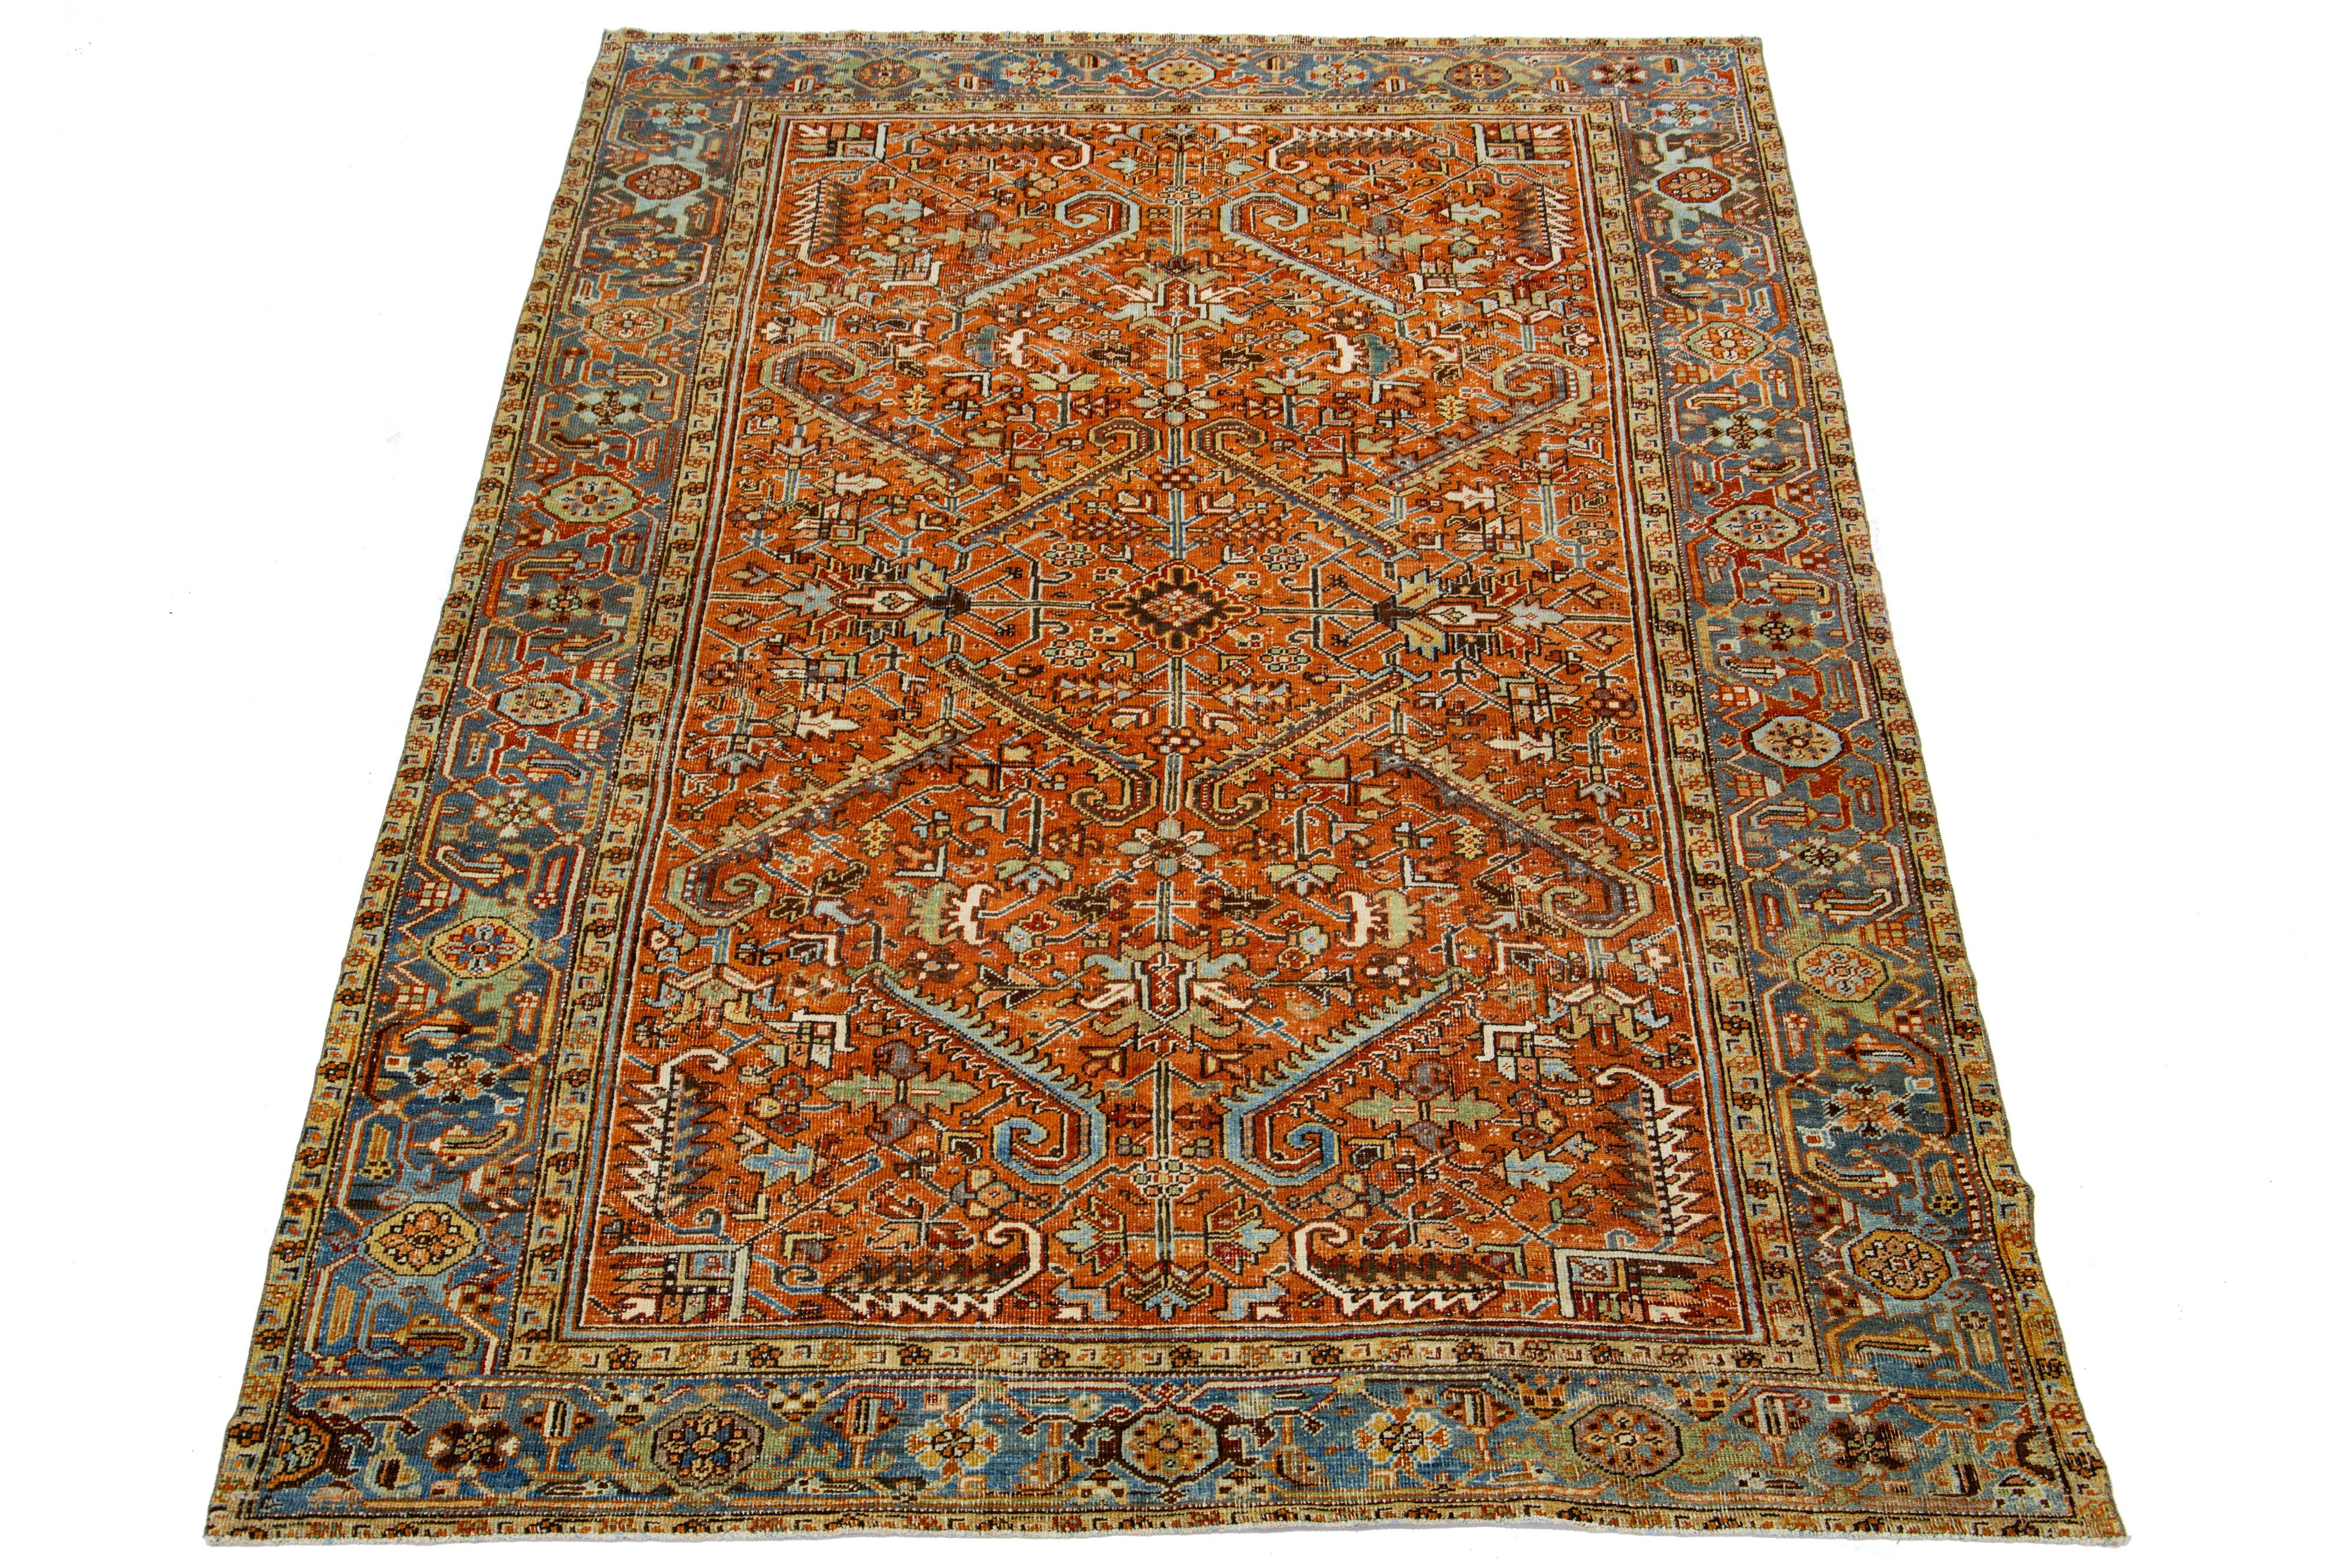 The antique Persian Heriz rug displays its impressive all-over design and hand-knotted wool construction. The soft beige field is a backdrop geometric floral pattern adorned in multicolor shades.

This rug measures 6'7